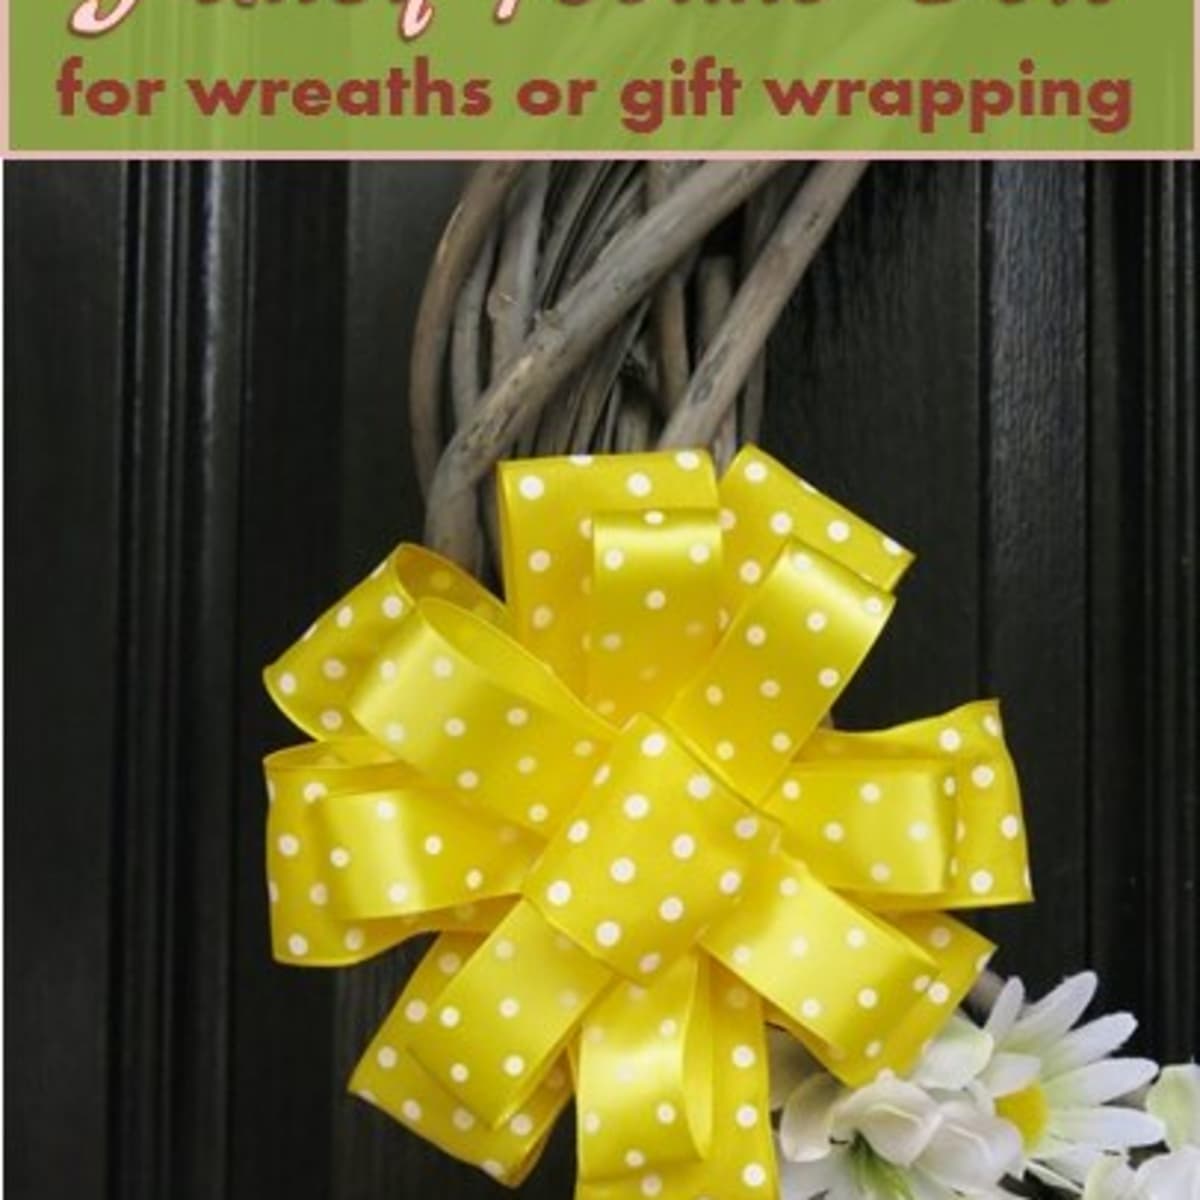 5" Diameter Gift Wrapping Bows Different Colors NEW Gorgeous Large 